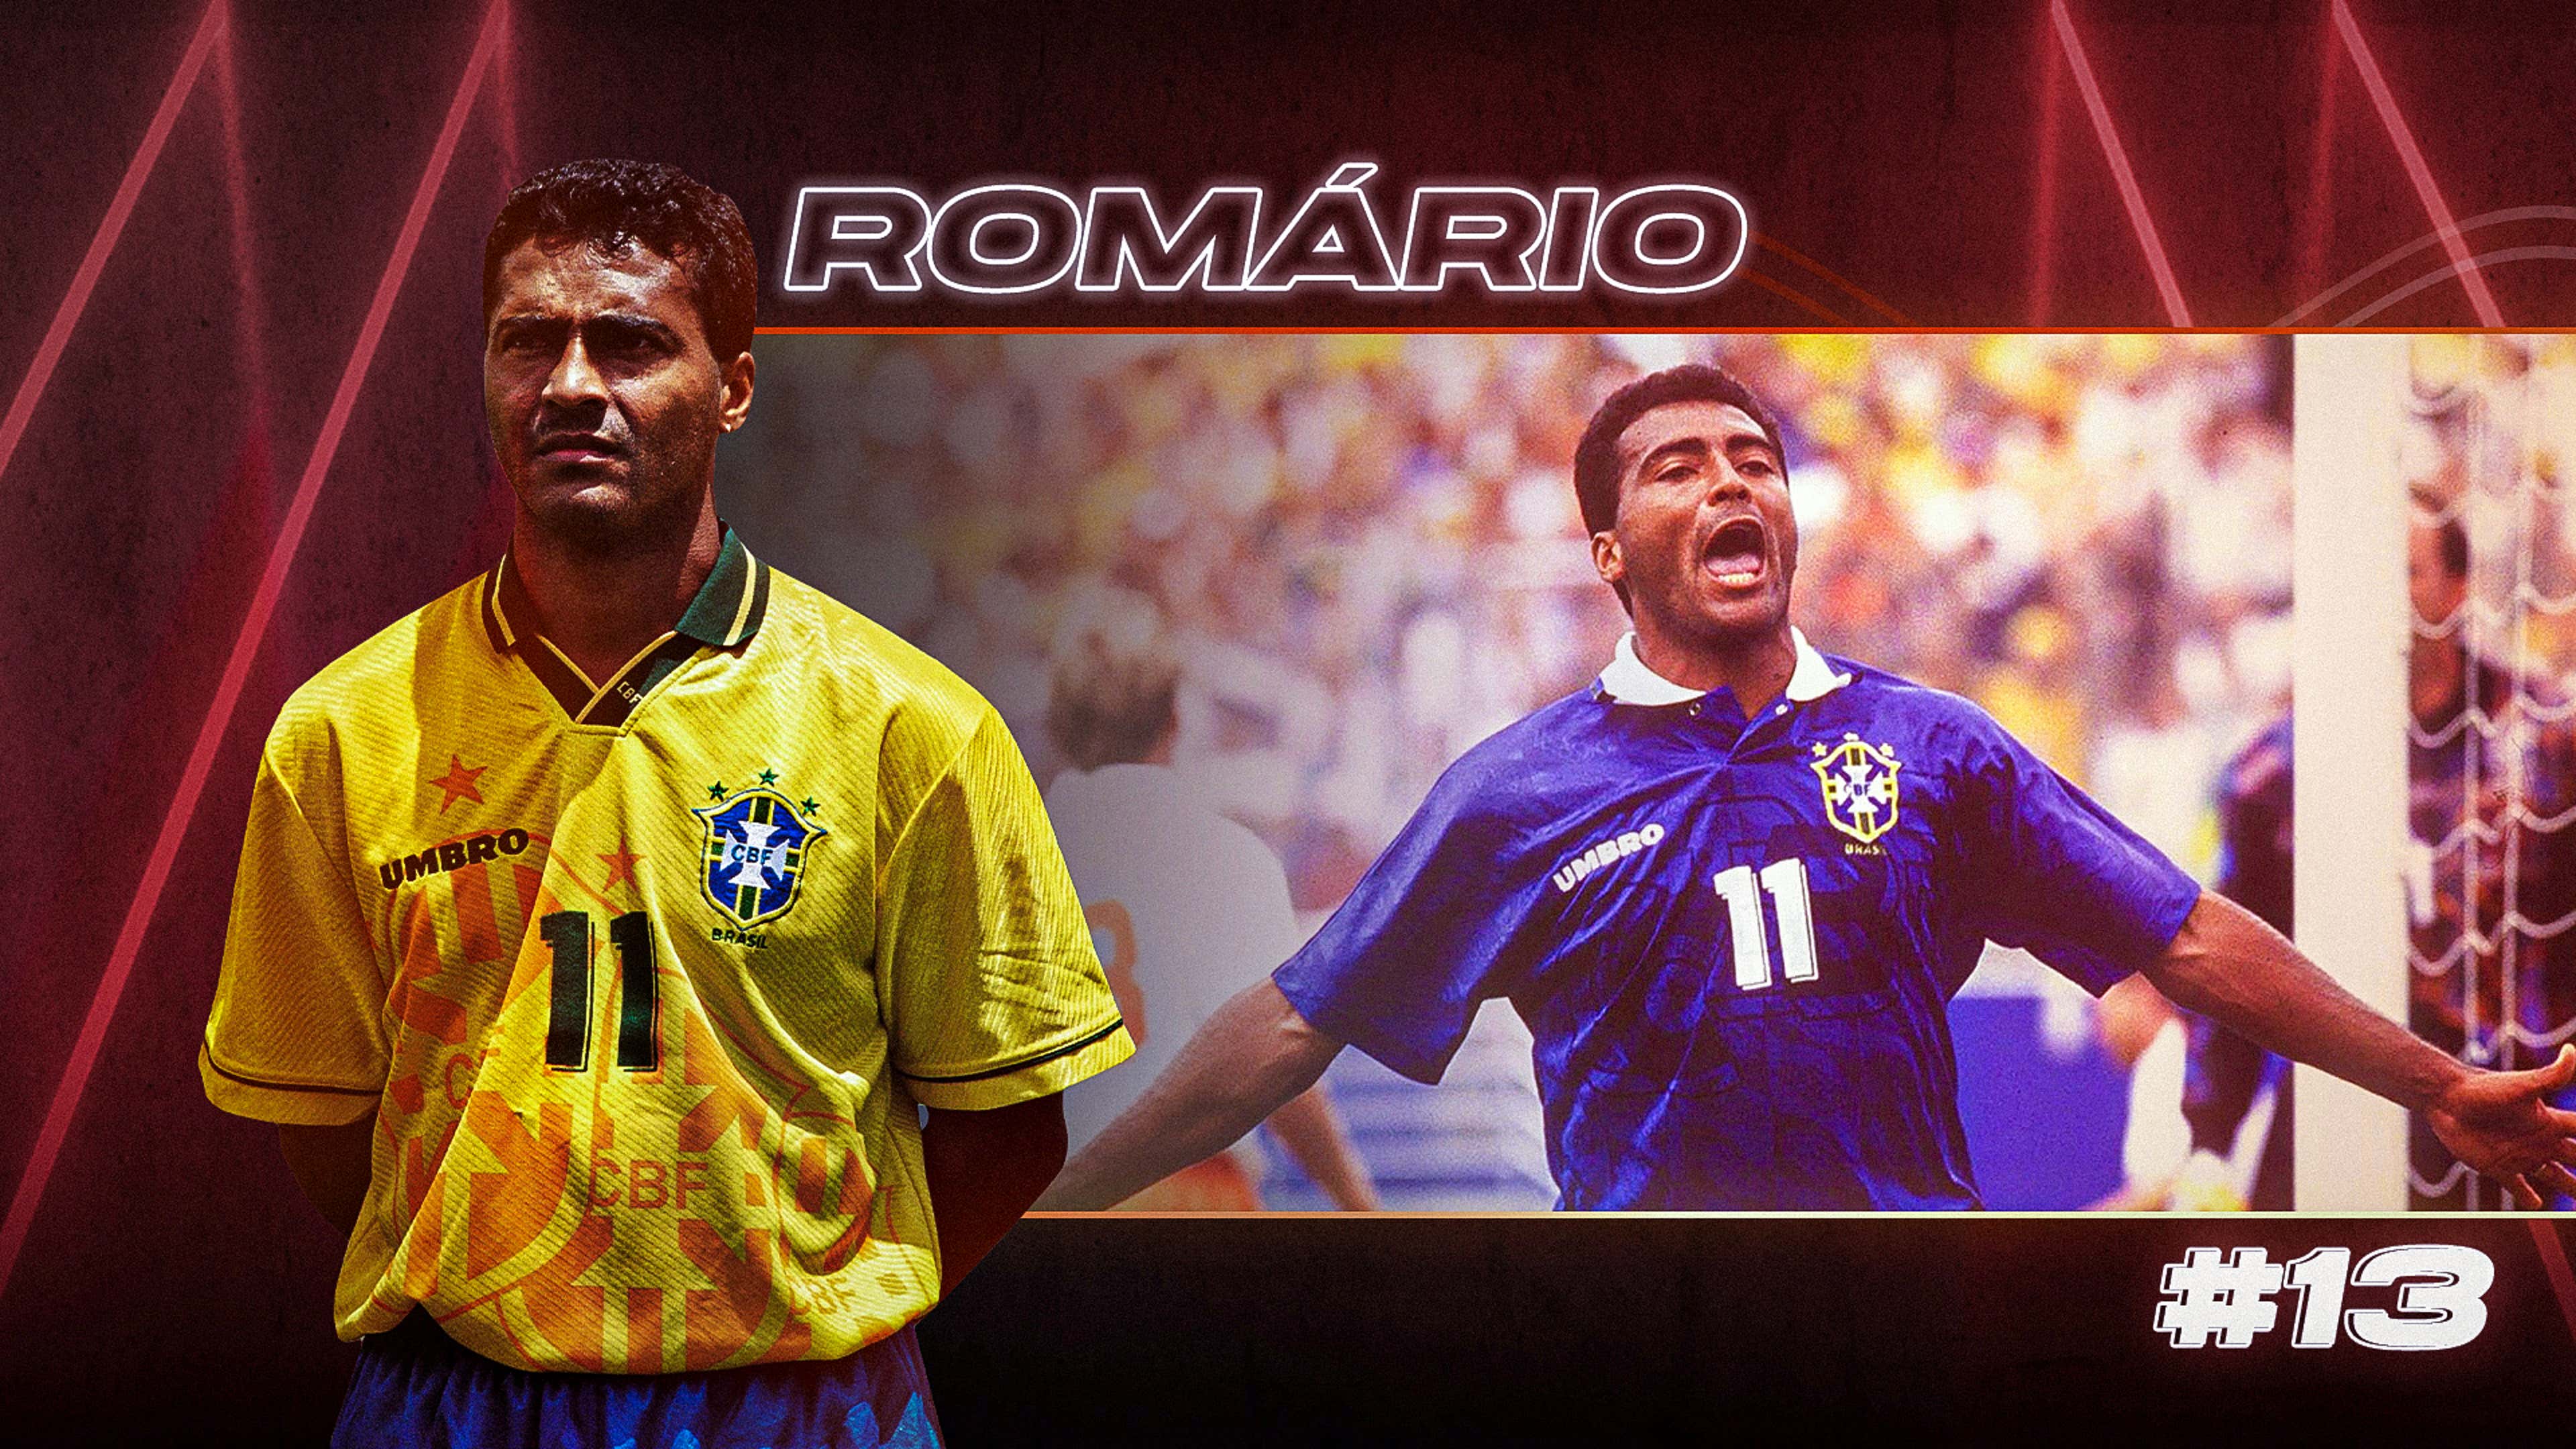 GOAL - Vote for the greatest of all time in our Legends World Cup